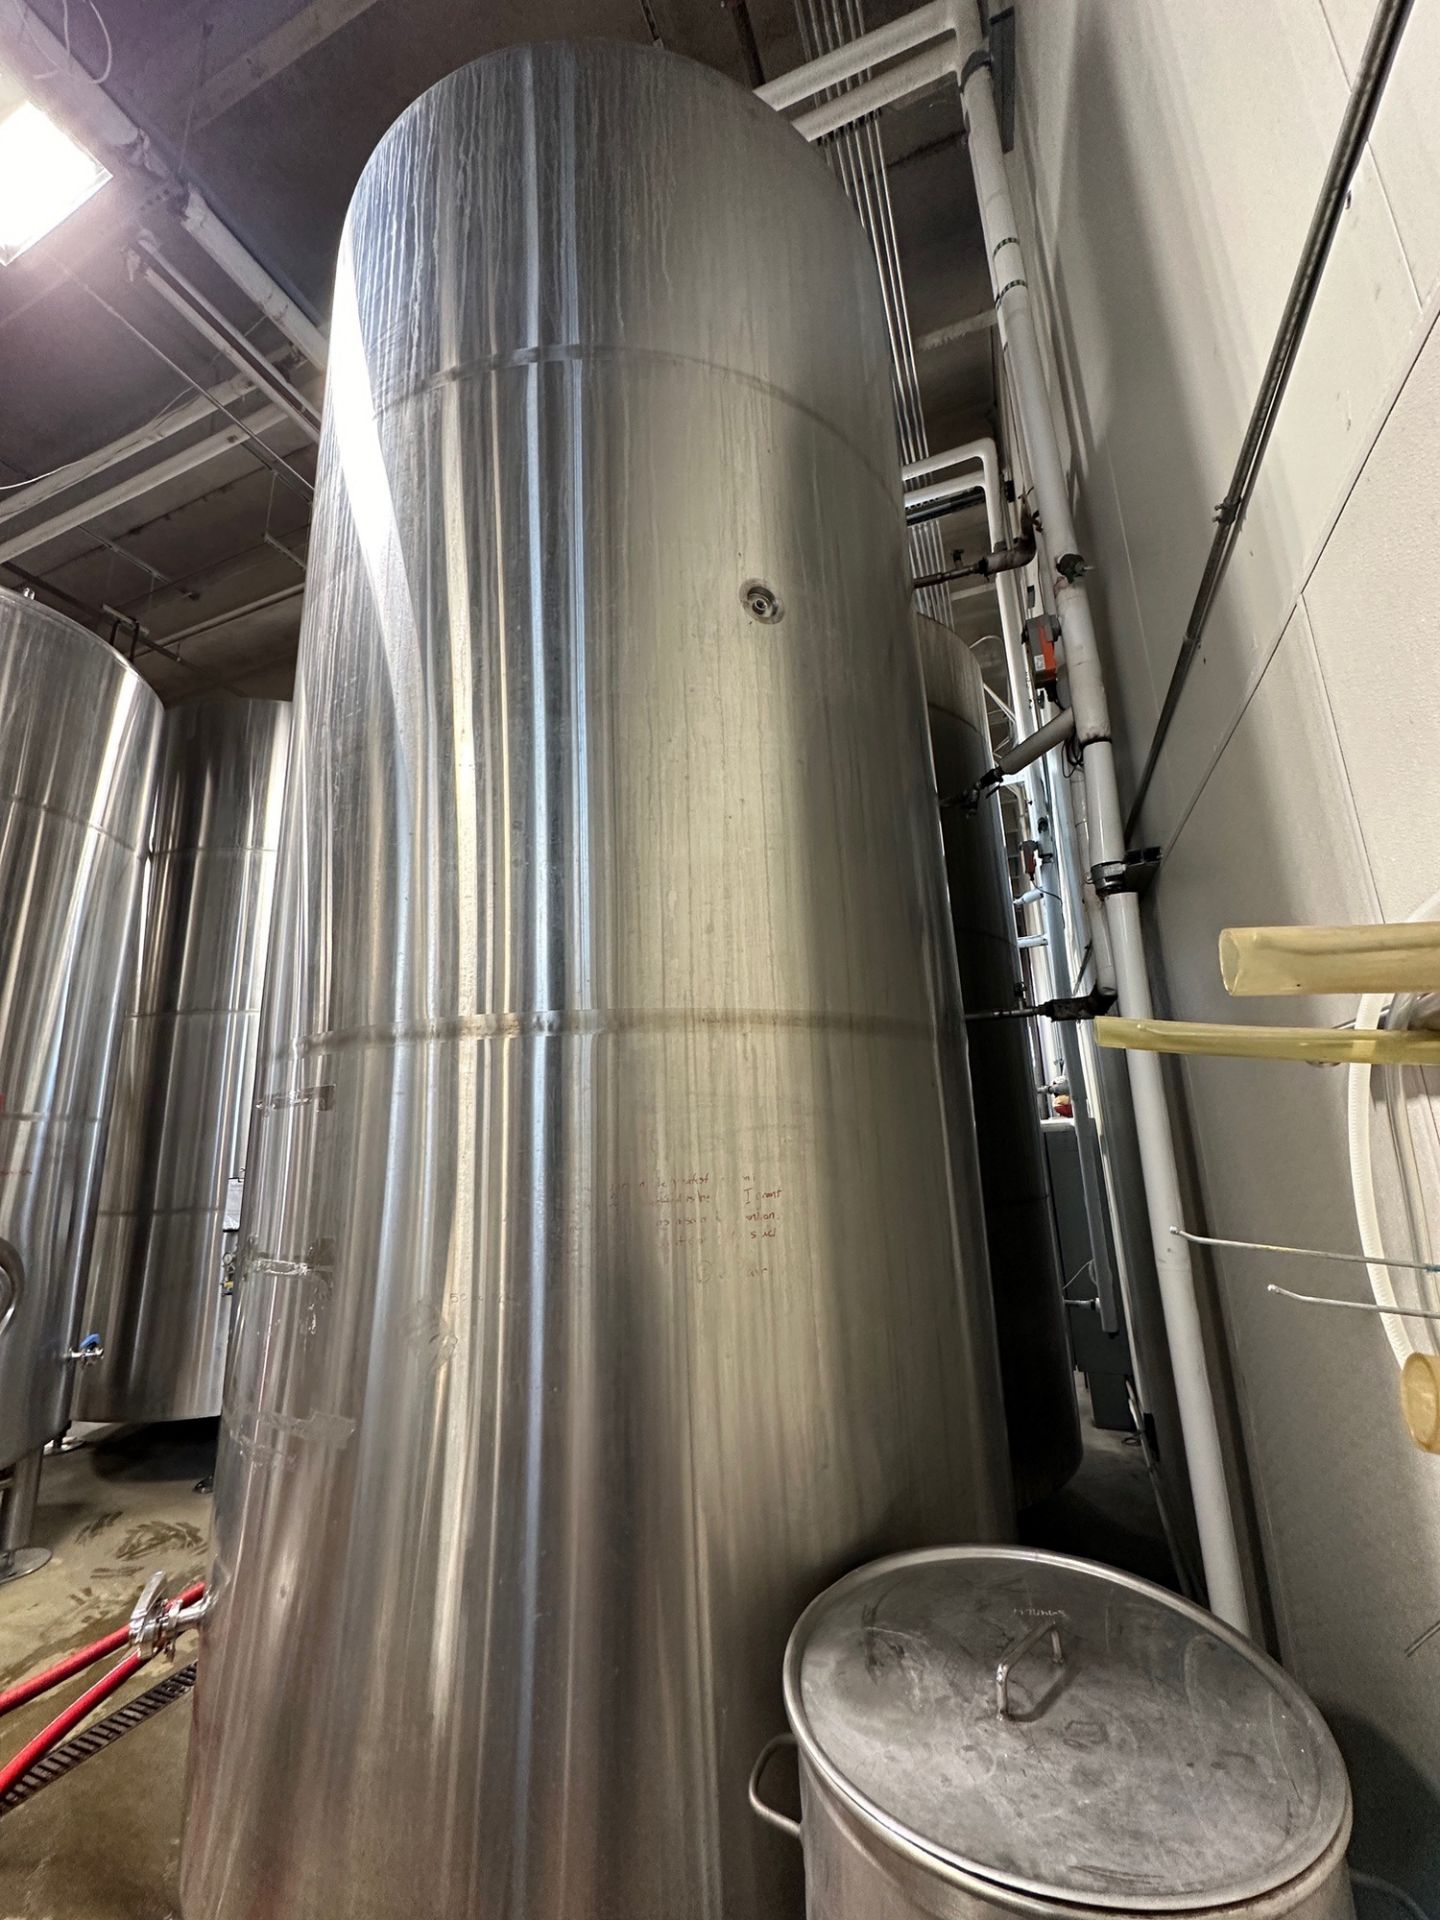 Premier Stainless 80 BBL Stainless Steel Brite Tank - Dish Bottom, Glycol Jacketed, | Rig Fee $1850 - Image 3 of 5